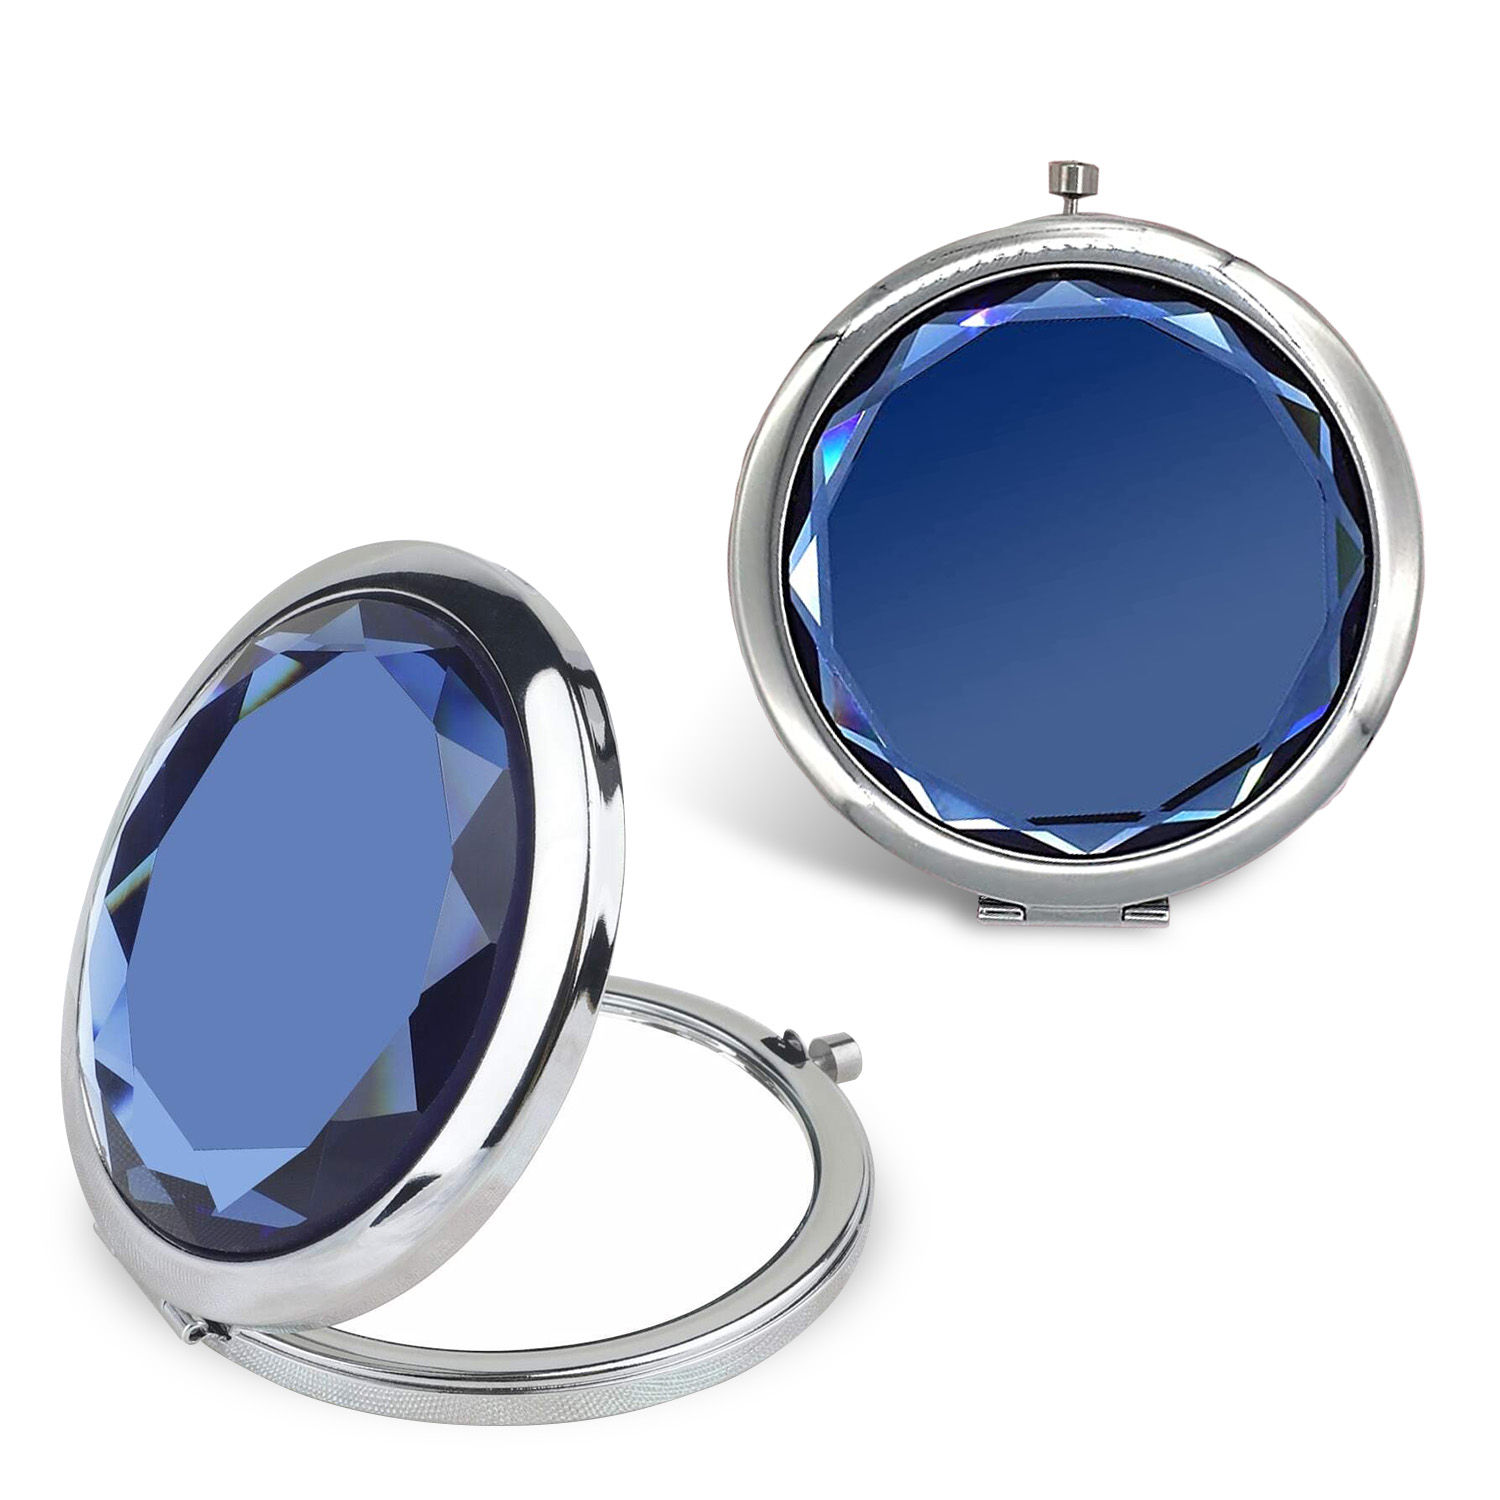 Buy Majestique Diamond Crystal Folding Makeup Mirror | Double-Sided 1X/2X Magnification | Perfect for Purse, Pocket and Travel - 1Pc/Multicolor - Purplle